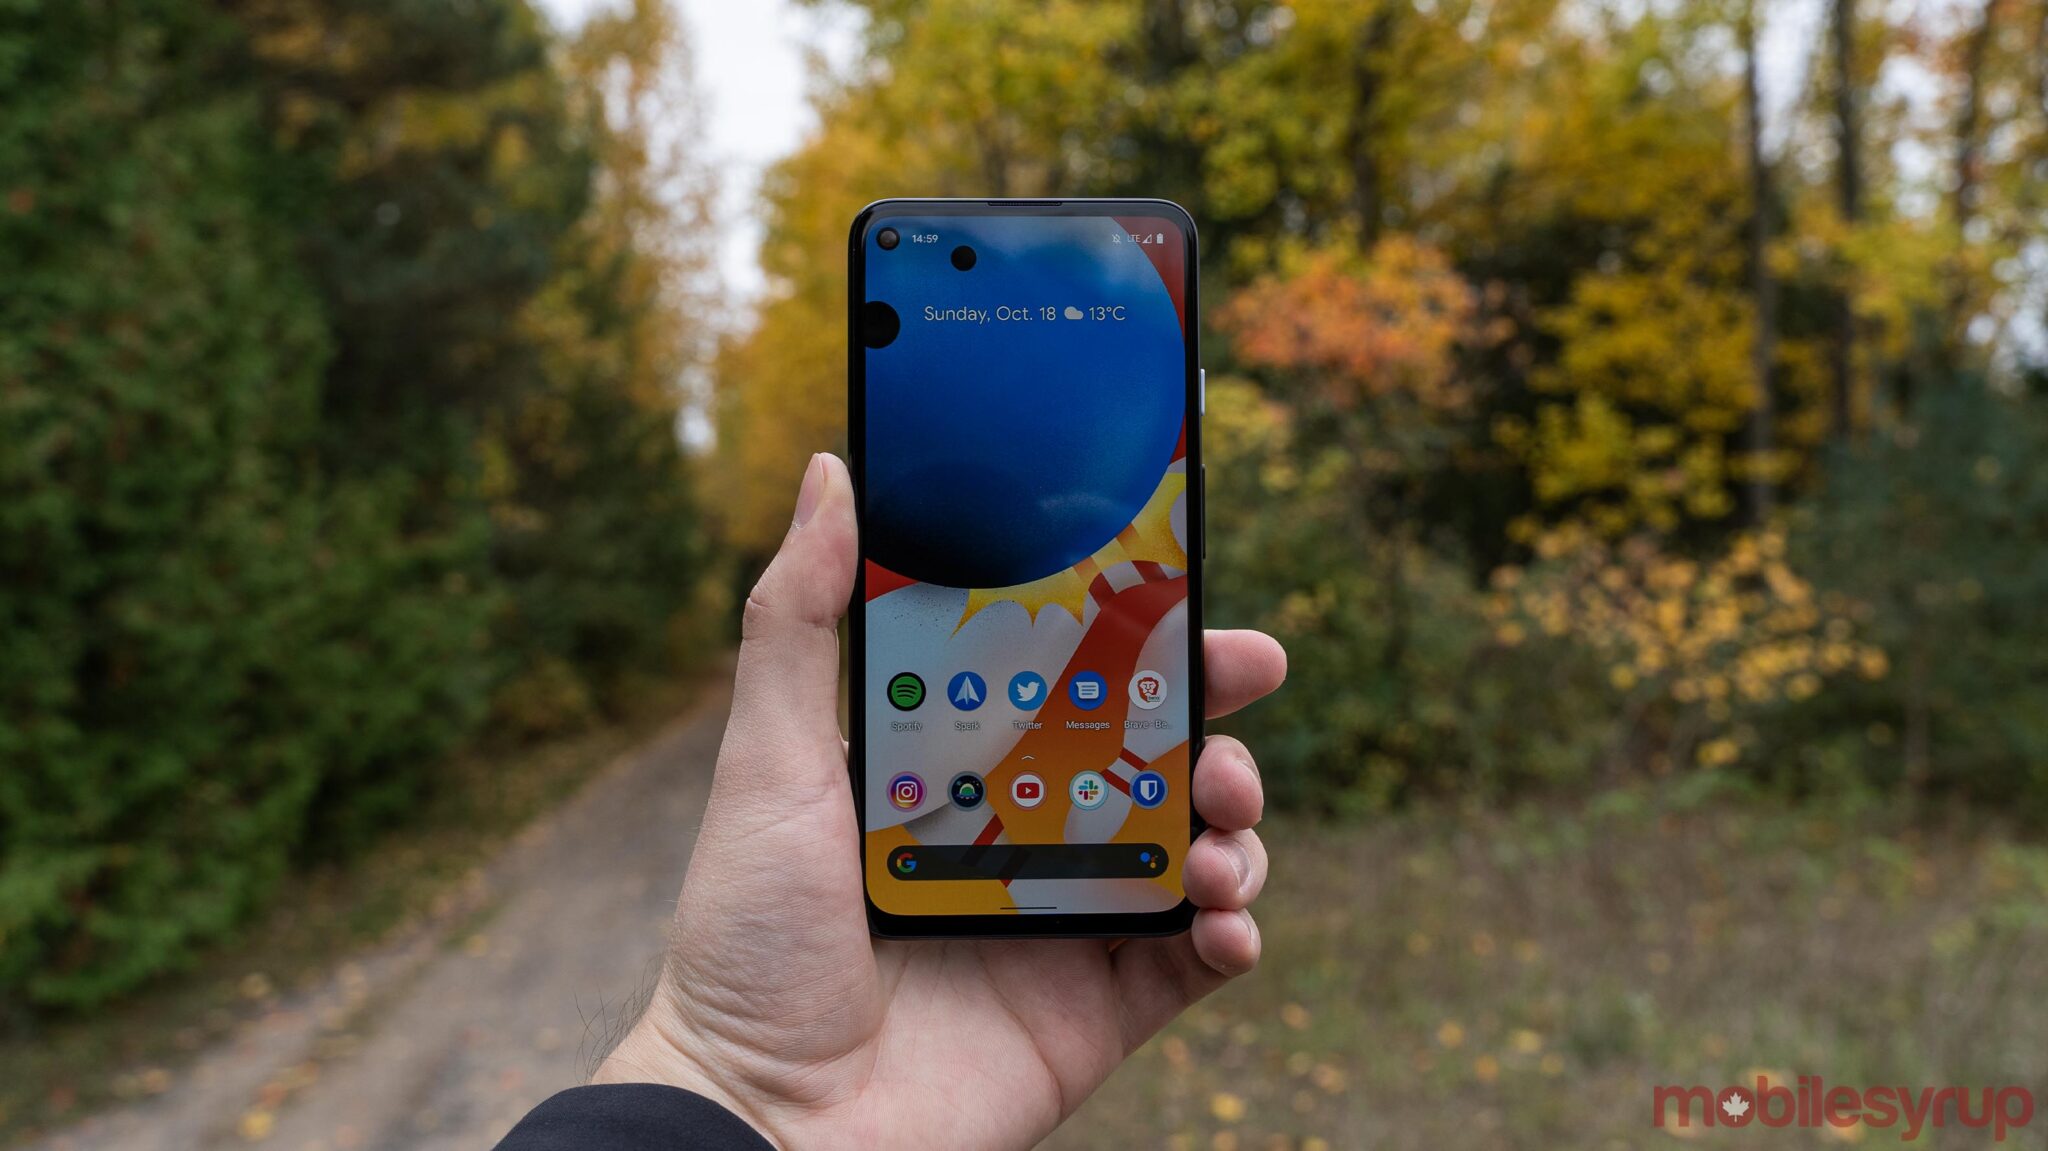 Google Pixel 4a 5G is now available for pre-order in Canada